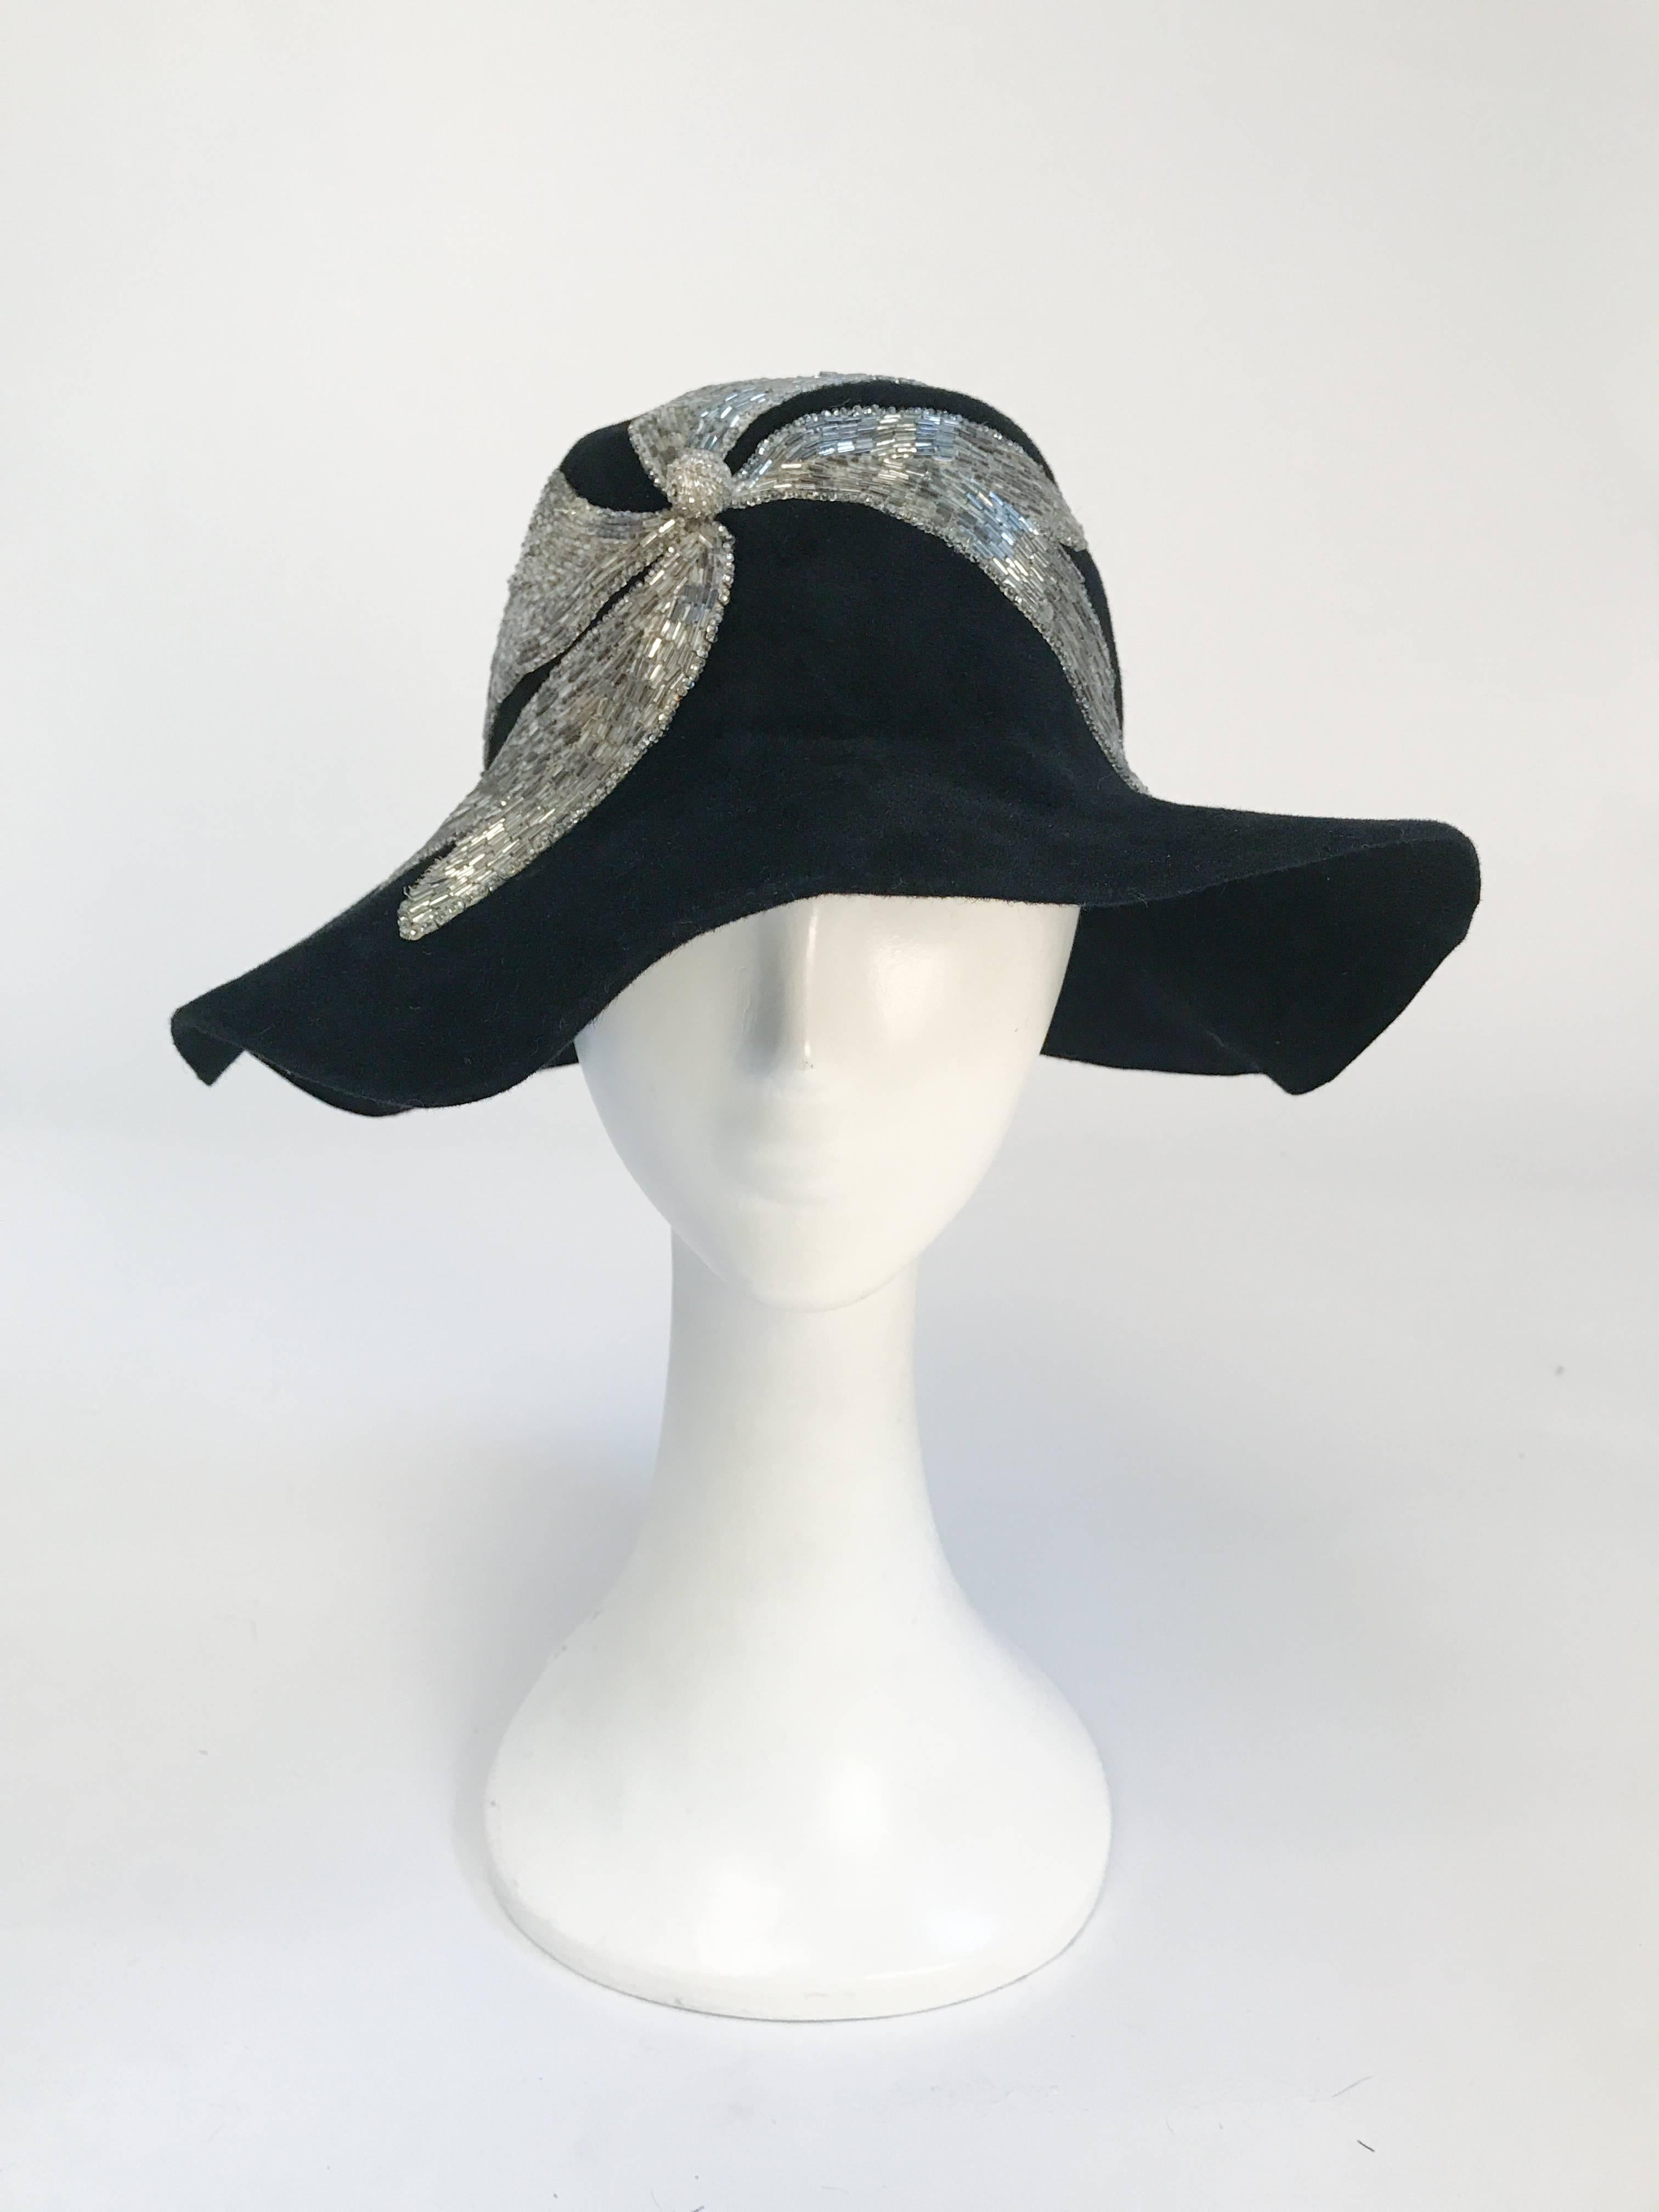 1970's Black and Silver Appliqué. Black fur felt wide brimmed hat with silver glass beaded applique. 21 1/2 inch circumference.